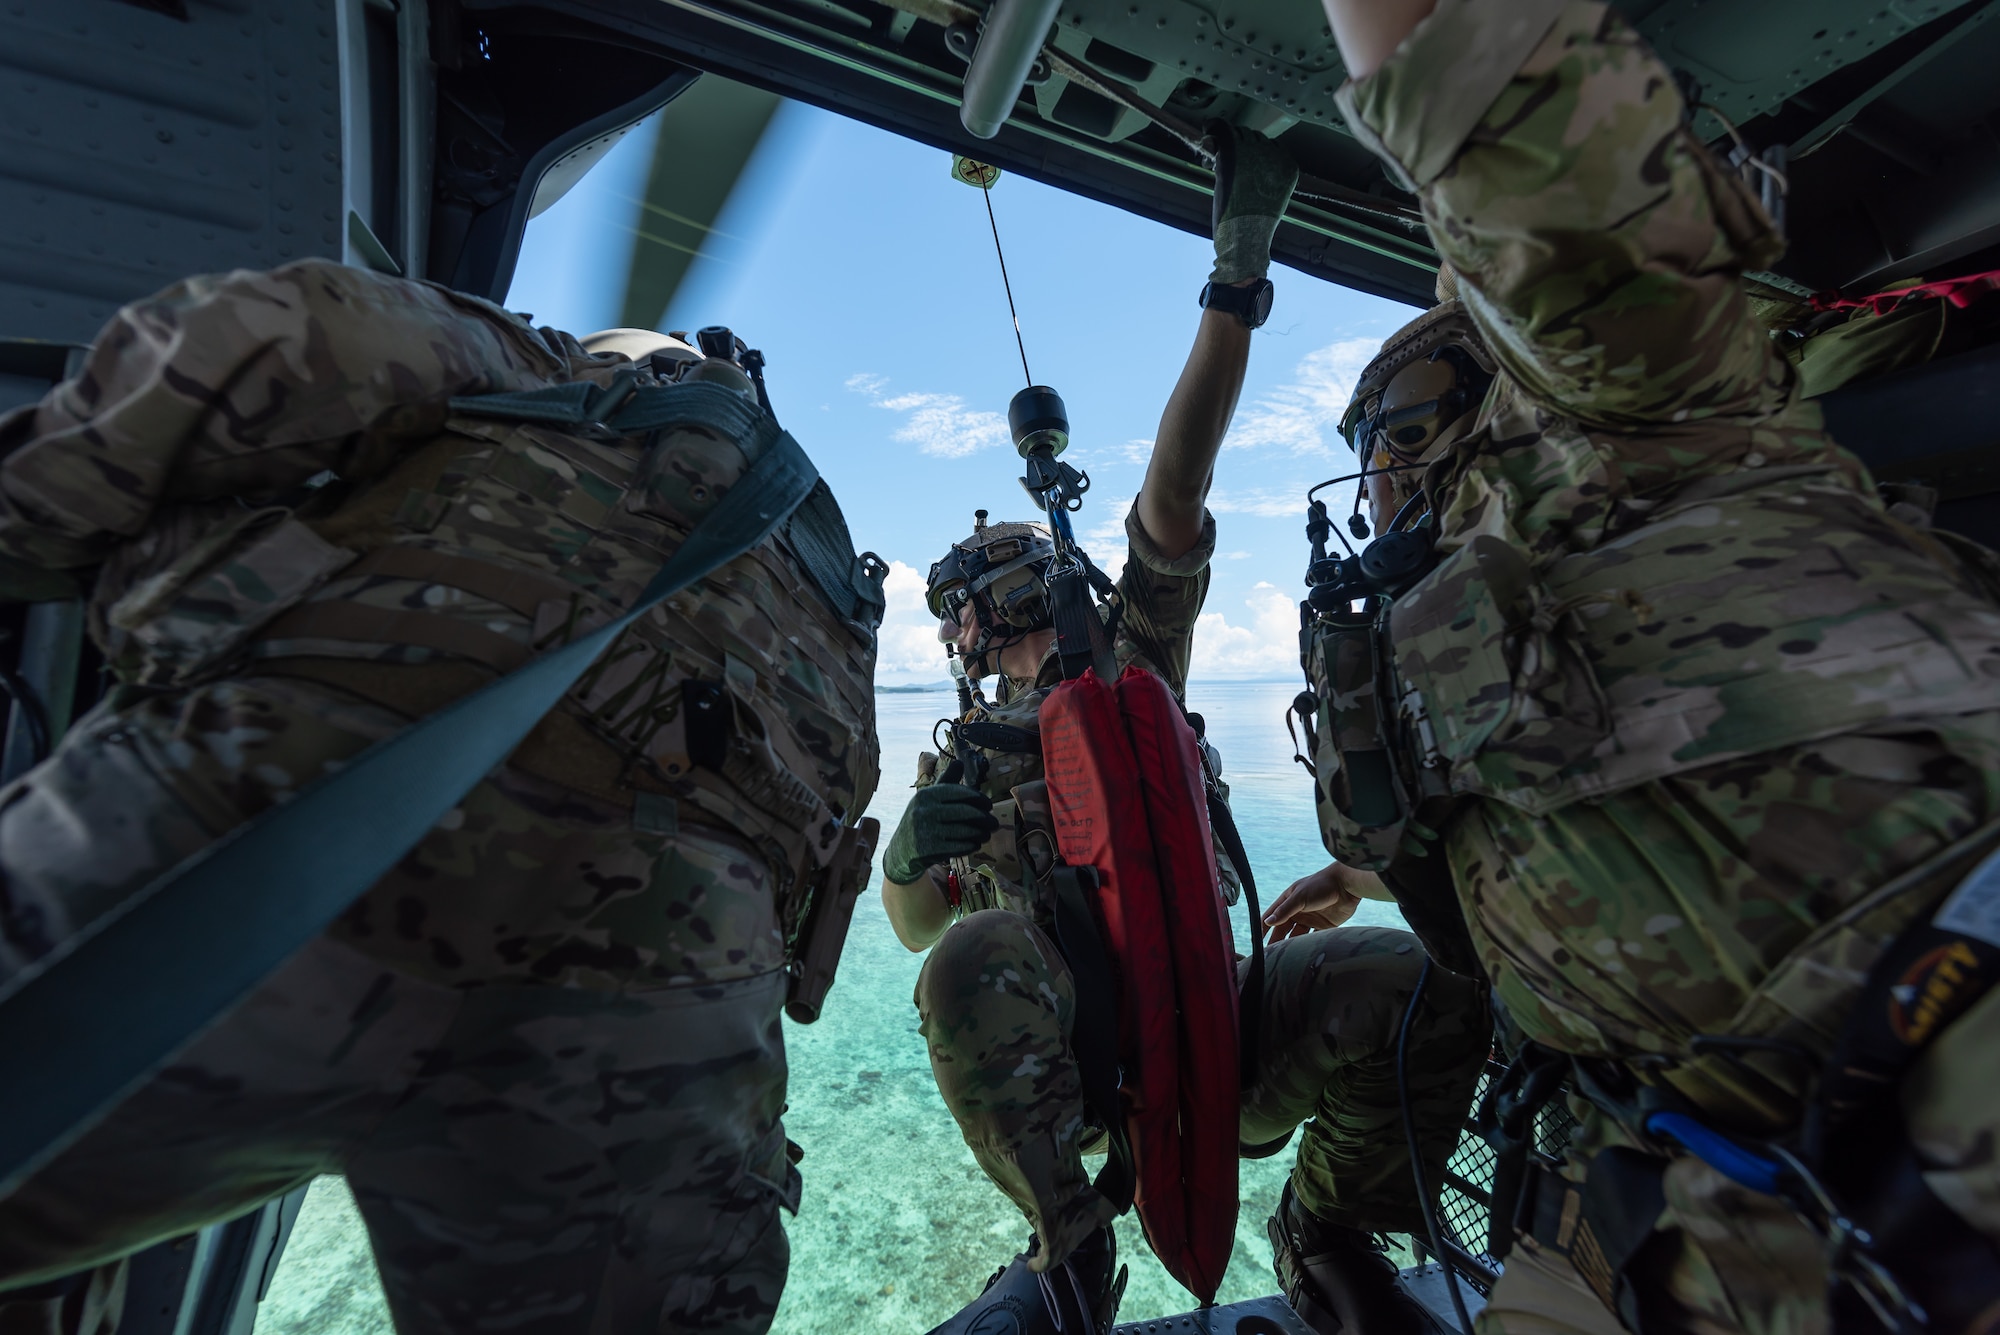 Two U.S. Air Force pararescuemen assigned to the 31st Rescue Squadron, prepare a hoist for a water operation while aboard an HH-60G Pave Hawk, July 26, 2019, out of Kadena Air Base, Japan. Members of the 33rd and 31st Rescue Squadrons from Kadena AB train and work together to provide support for combat rescue and disaster relief. (U.S. Air Force photo by Airman 1st Class Matthew Seefeldt)